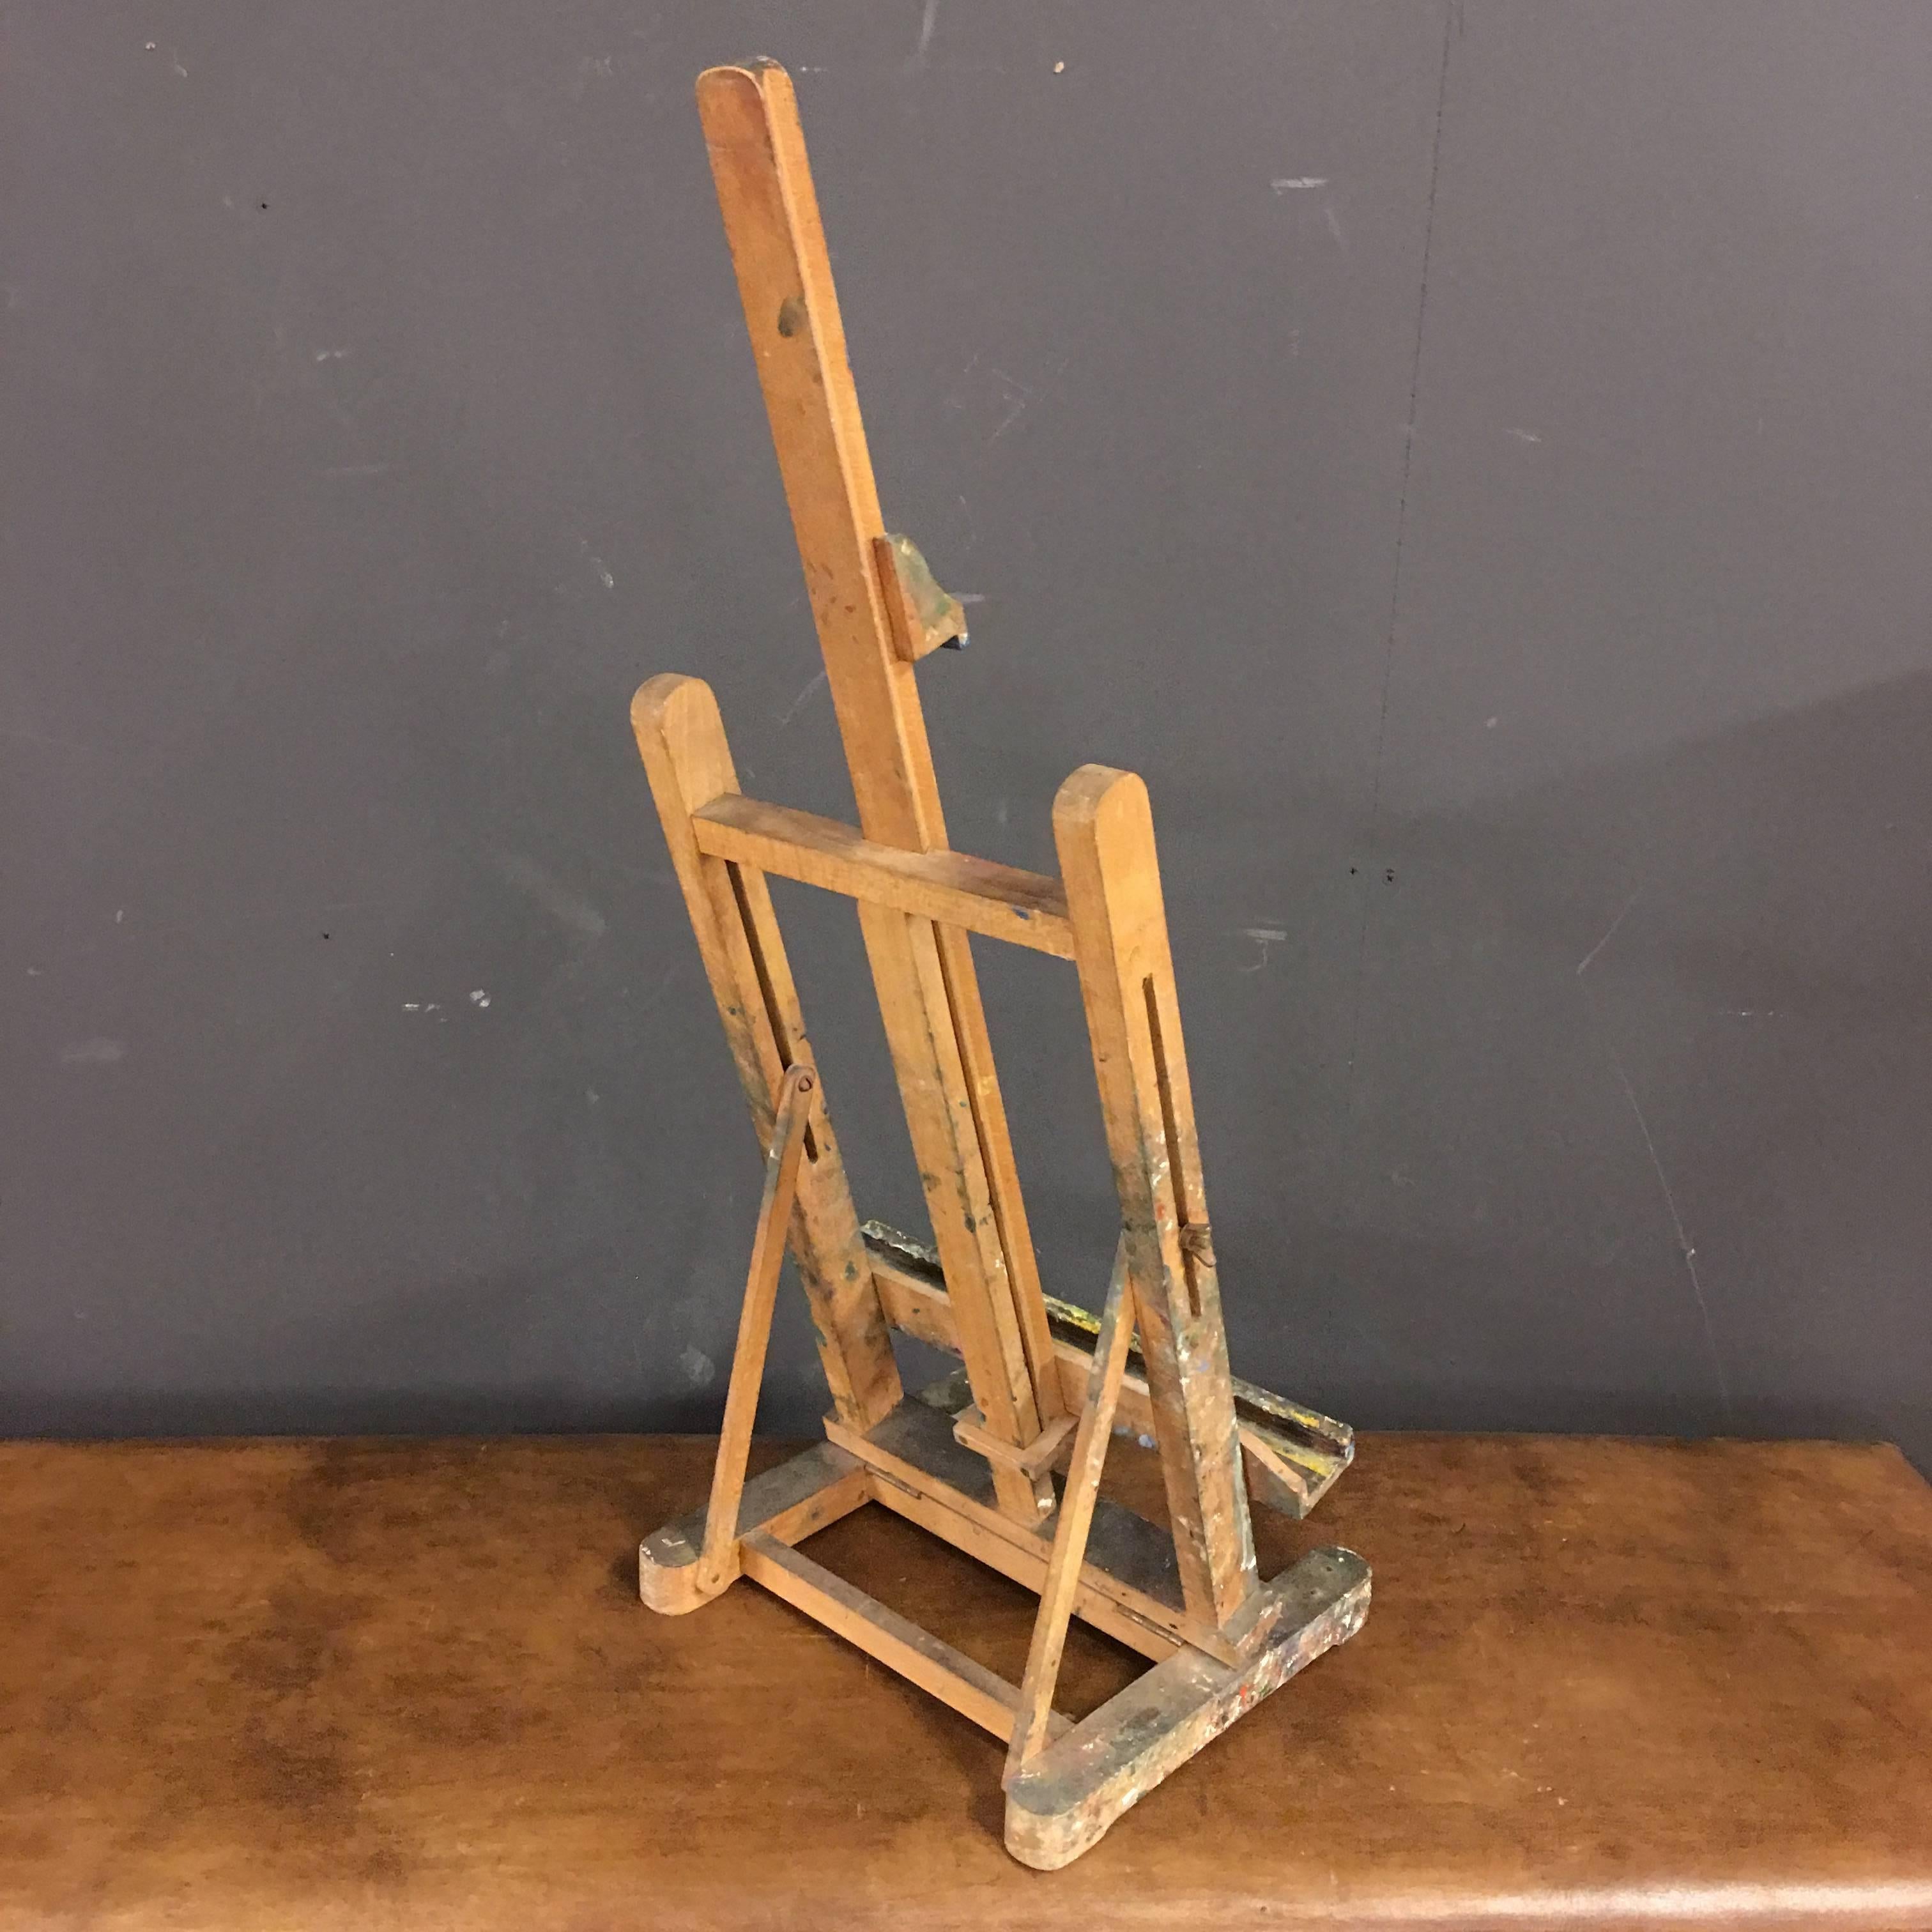 This small vintage easel is made of beechwood.
Manufactured by Lefranc, France, early mid-20th century.
Decorative piece.